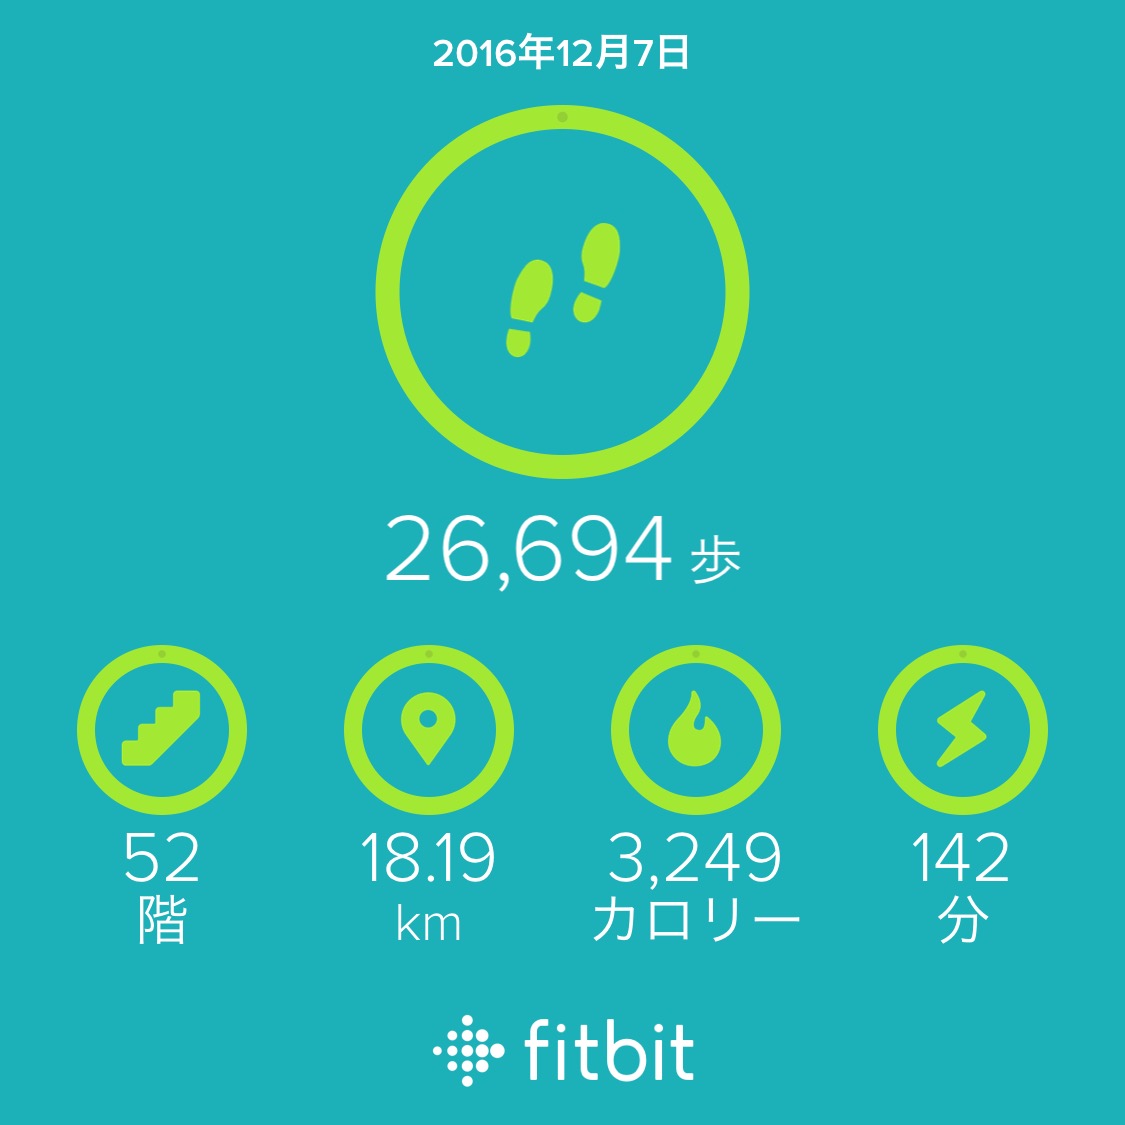 Fitbit Charge 2 - Fitbit Community